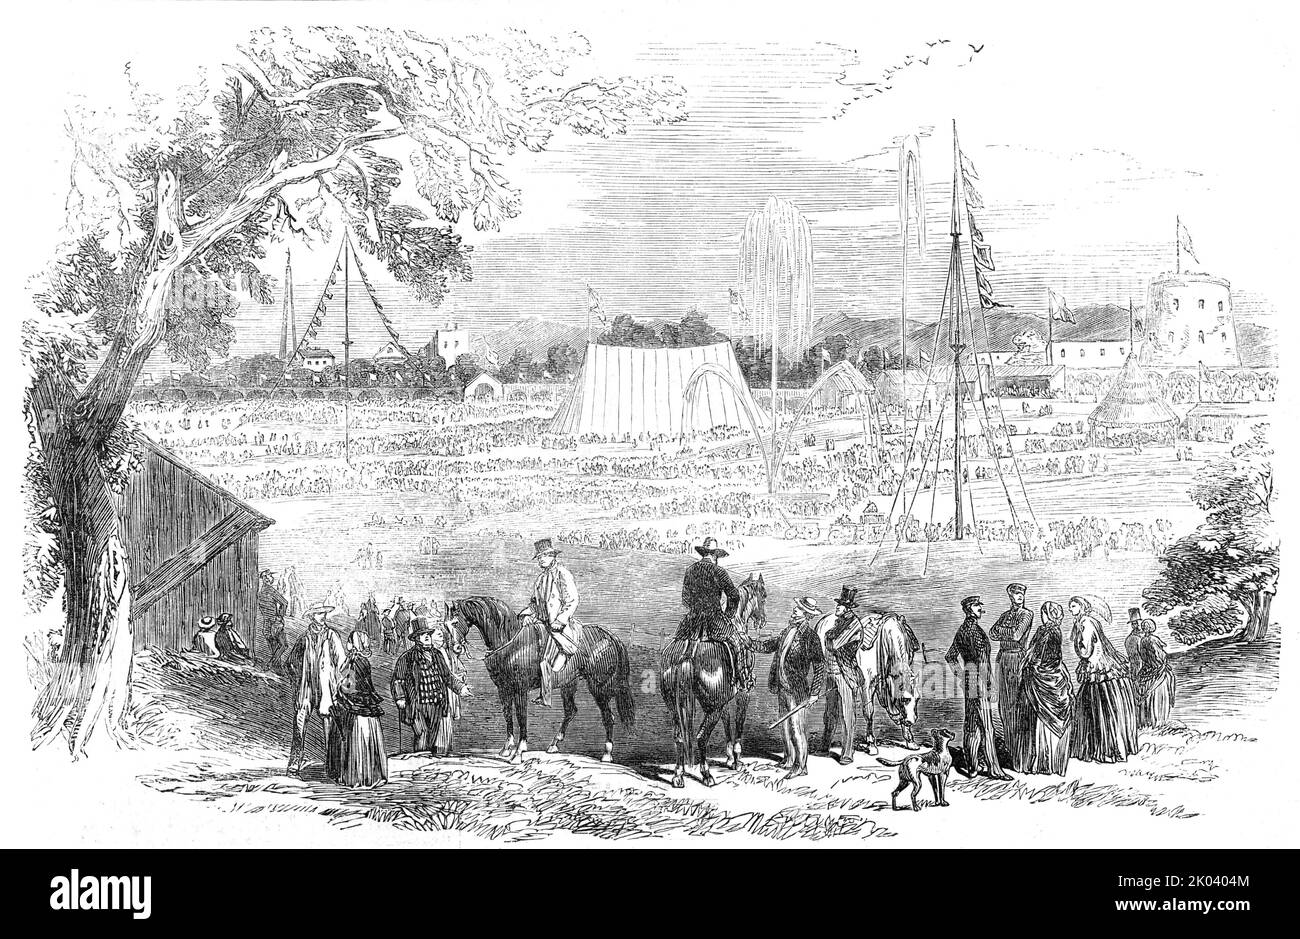 The Lower Canadian Agricultural Exhibition, 1854. Annual Exhibition of the Lower Canadian Agricultural Society, held on the Plains of Abraham, Quebec...'About 5000 persons received admission during the day, and it was impossible to walk among the assembly and hear its conversation carried on in English and French indifferently, and not be struck by the complete fusion of races which it has been the constant aim of Lord Elgin to effect, and in which he has so signally succeeded...The stock exhibited showed a marked improvement over former years; the horses especially were much and deservedly ad Stock Photo